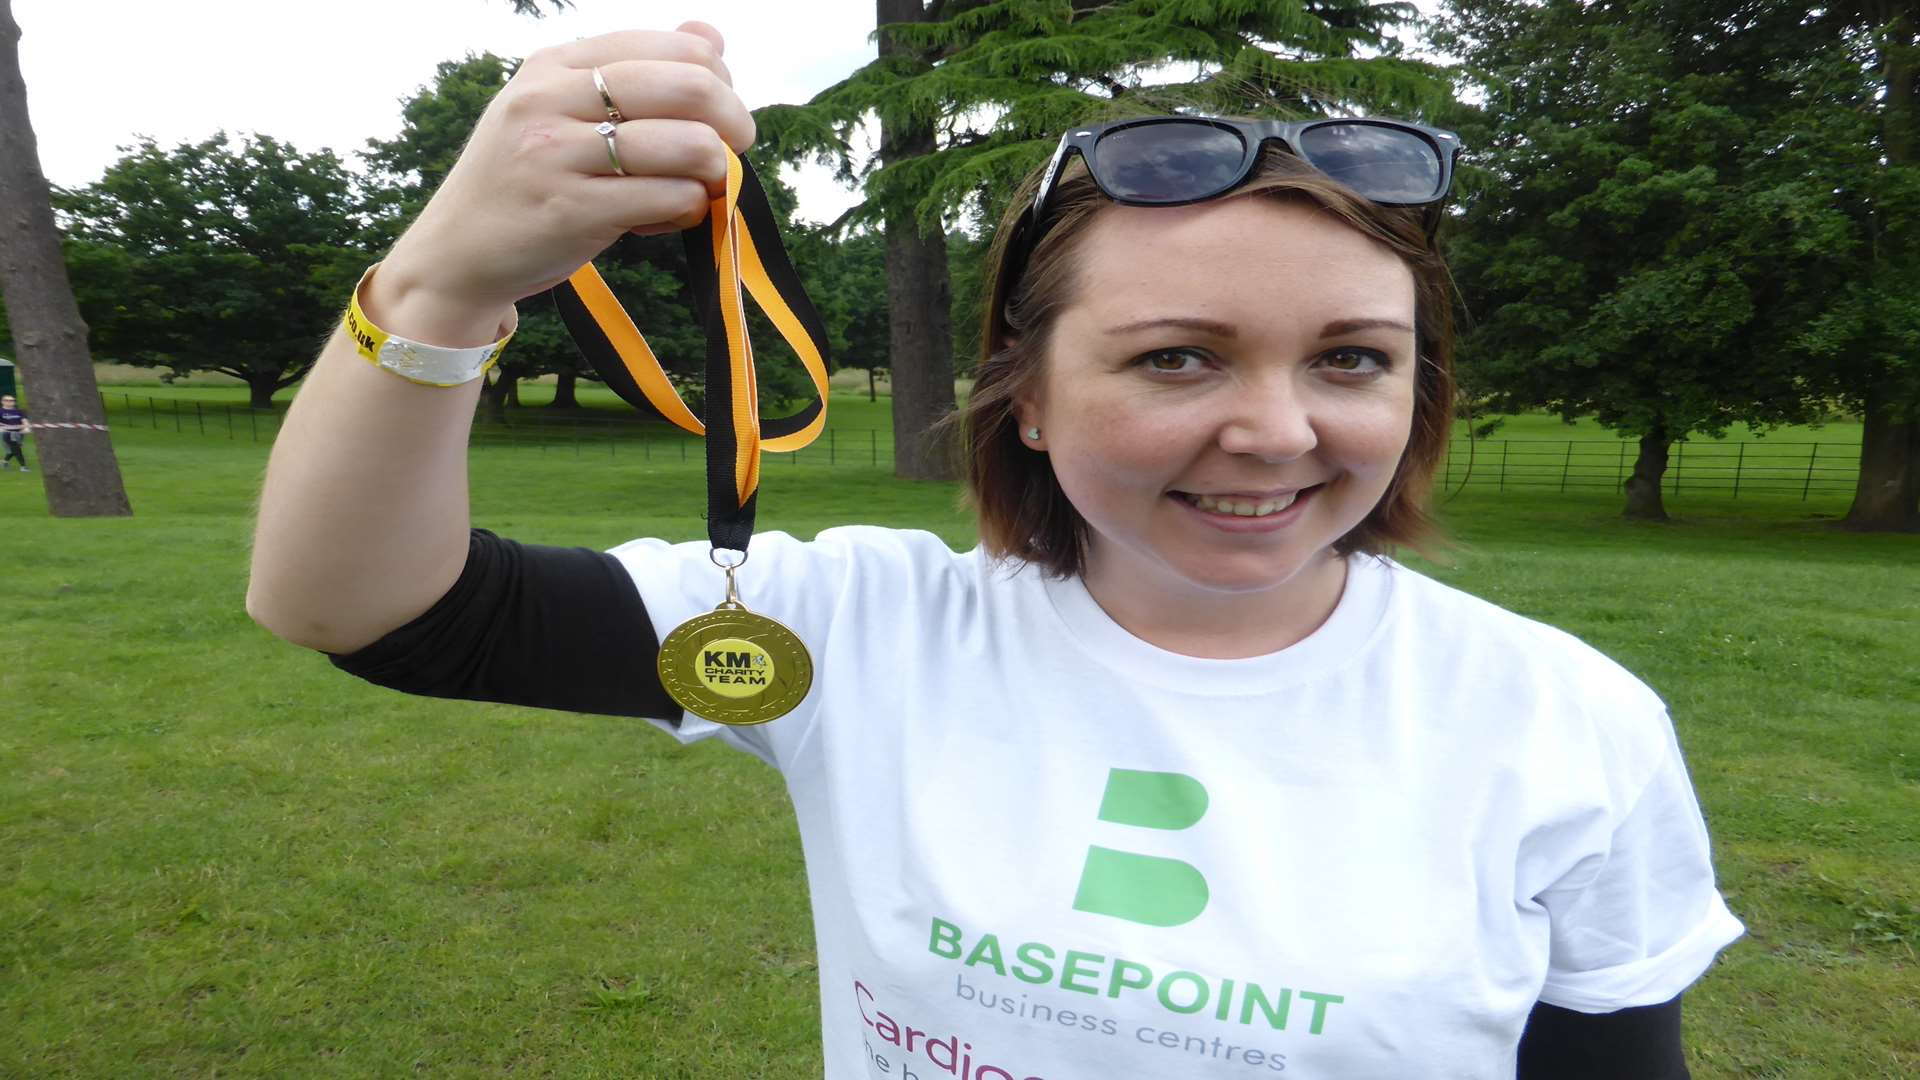 Kirsty Gordon-Thomas was the highest fundraiser on the day raising more than £1k for Cardiomyopathy UK.